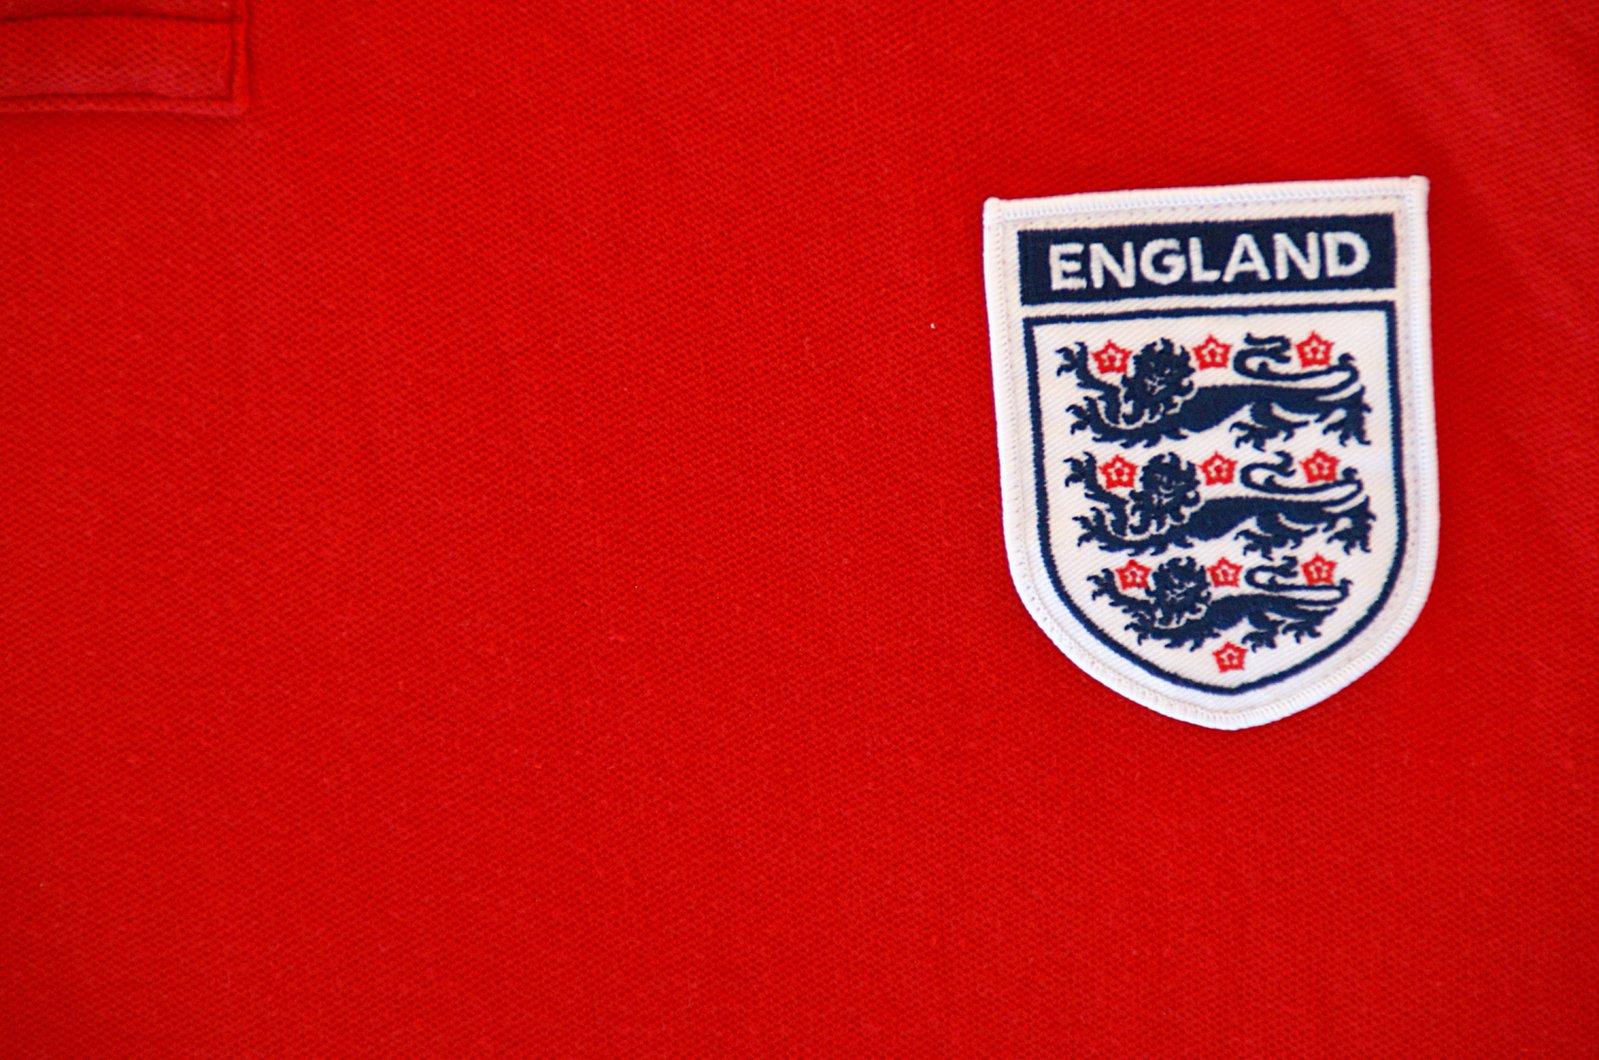 the england crest is on the red shirt